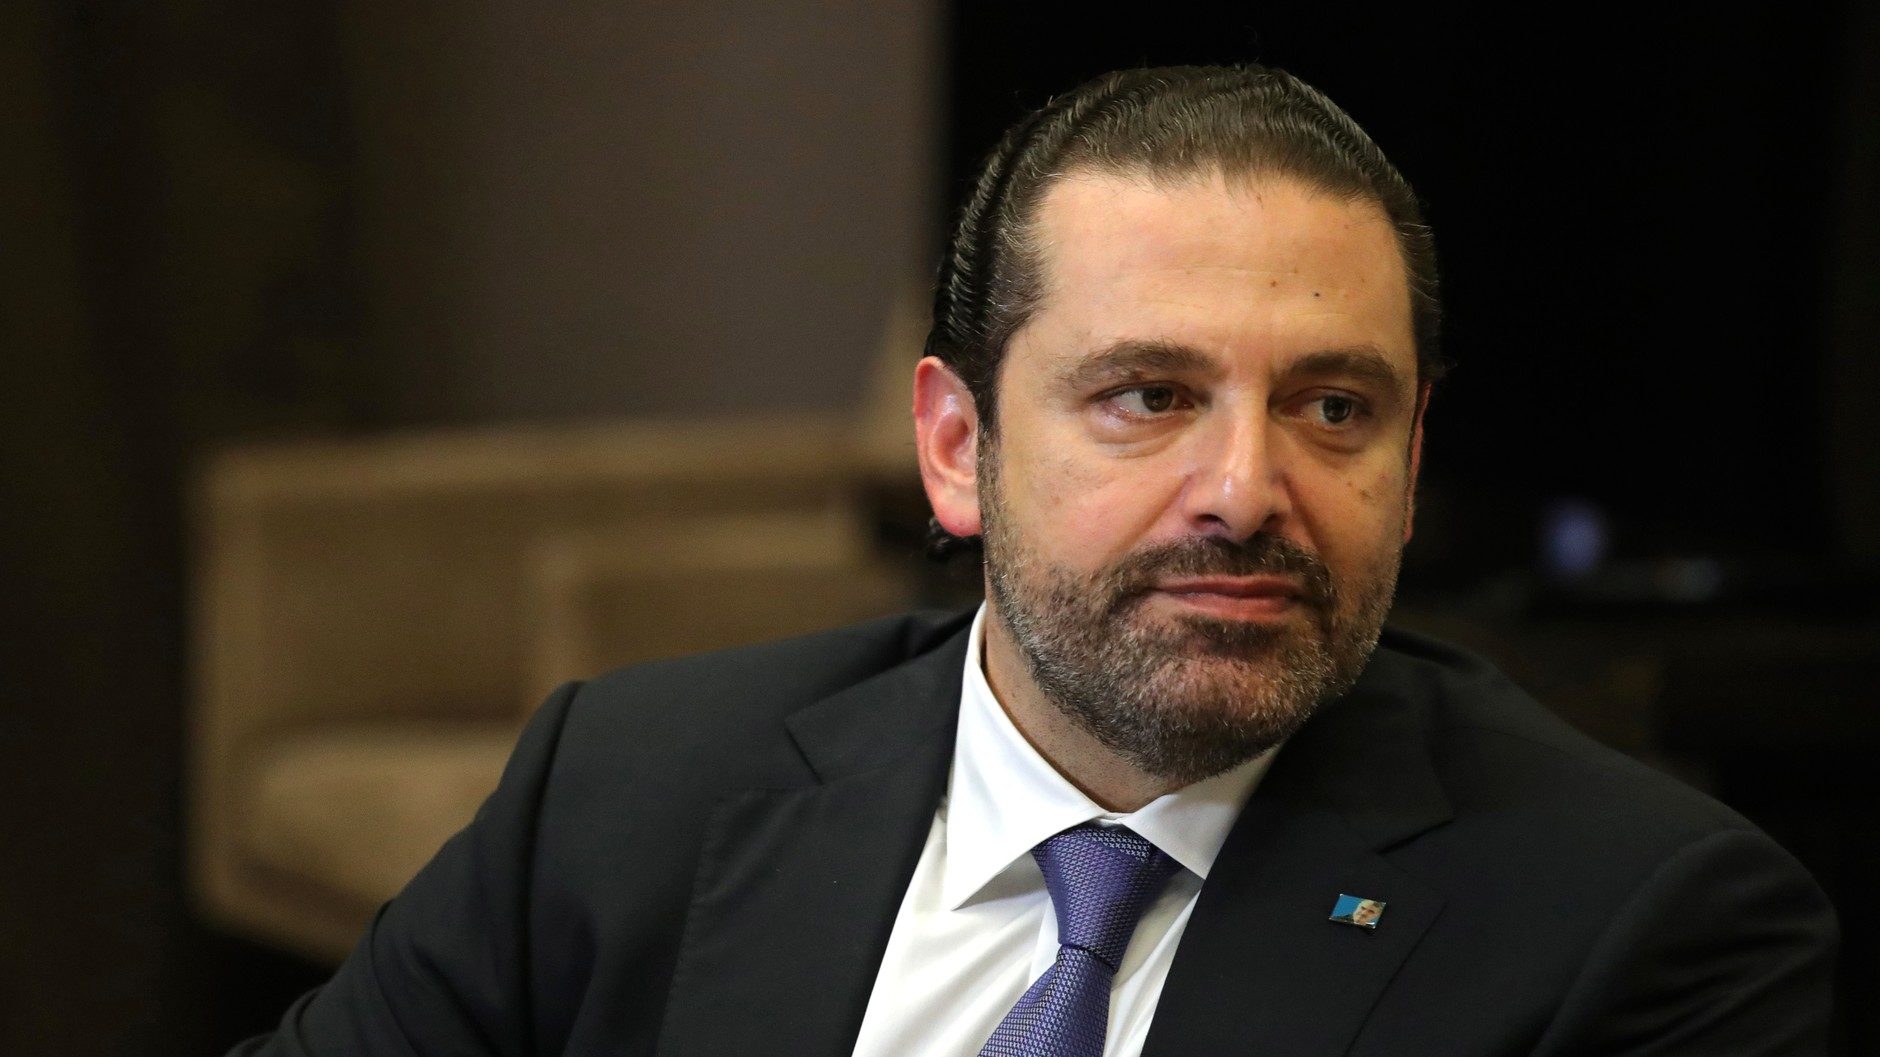 Hariri’s Withdrawal From Lebanese Politics Aims To Appease Gulf States